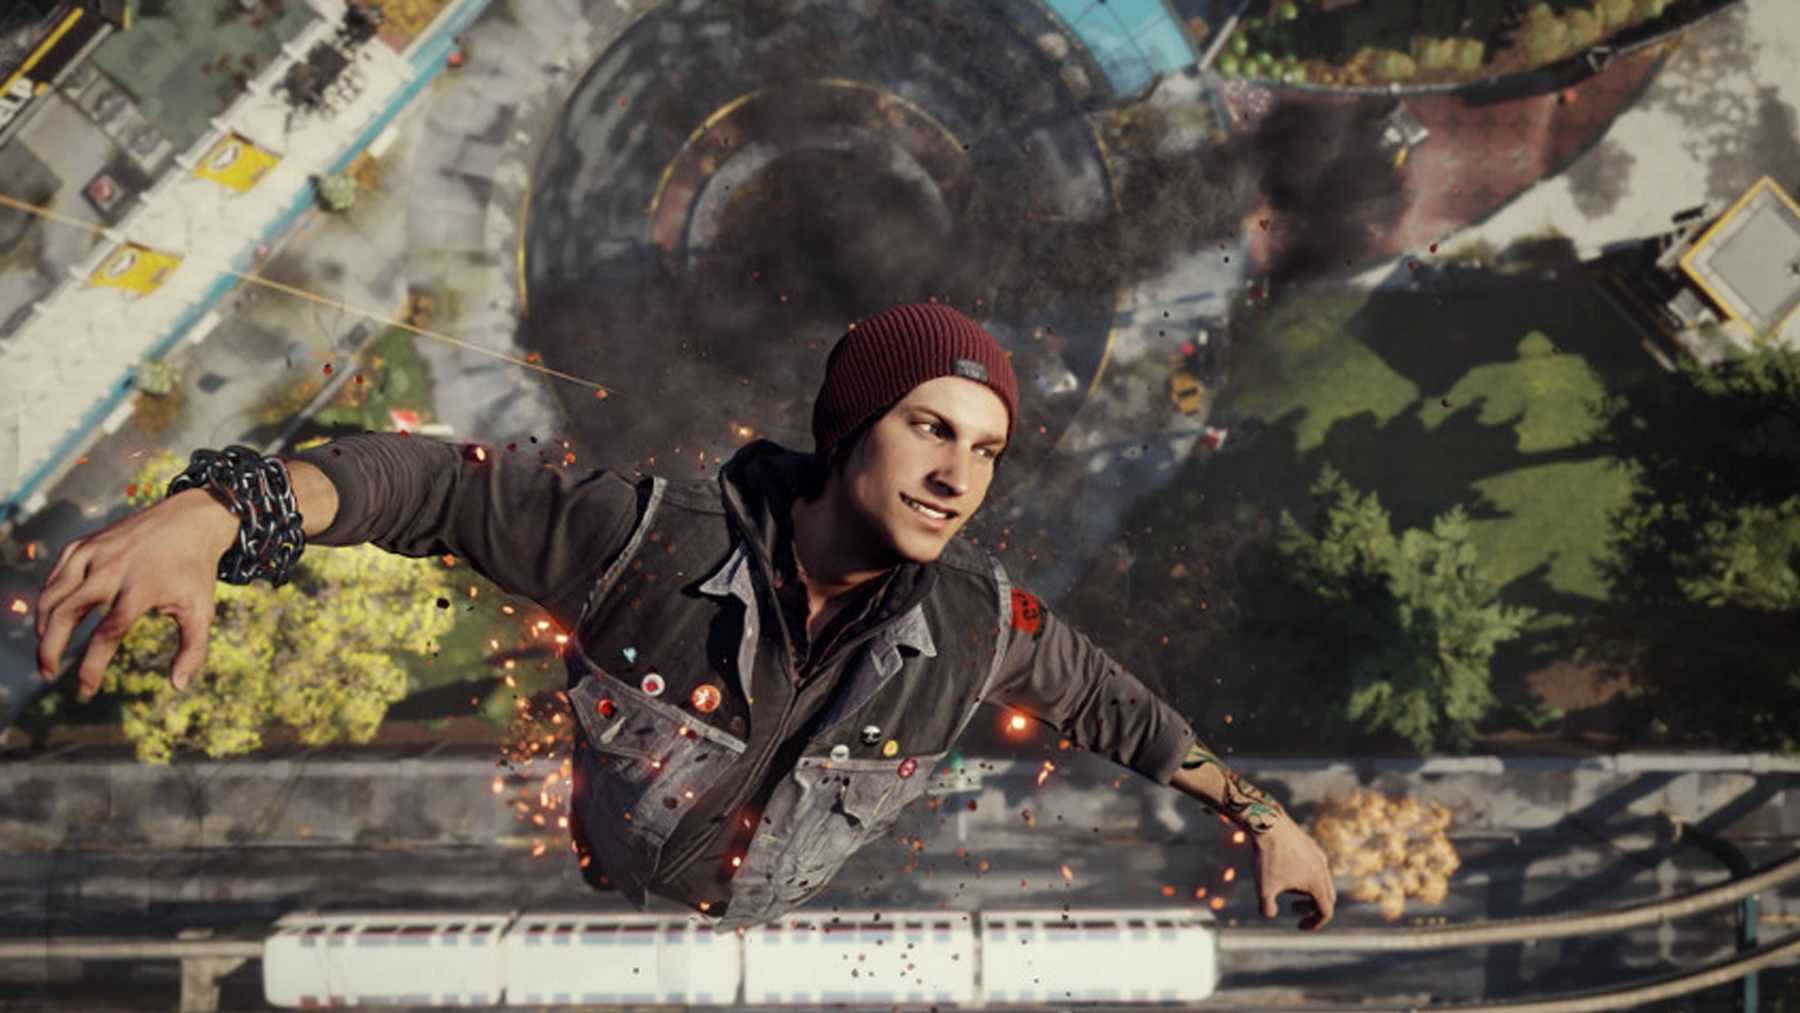 Screenshot from Infamous Second Son of main character Delsin Rowe falling from the Space Needle